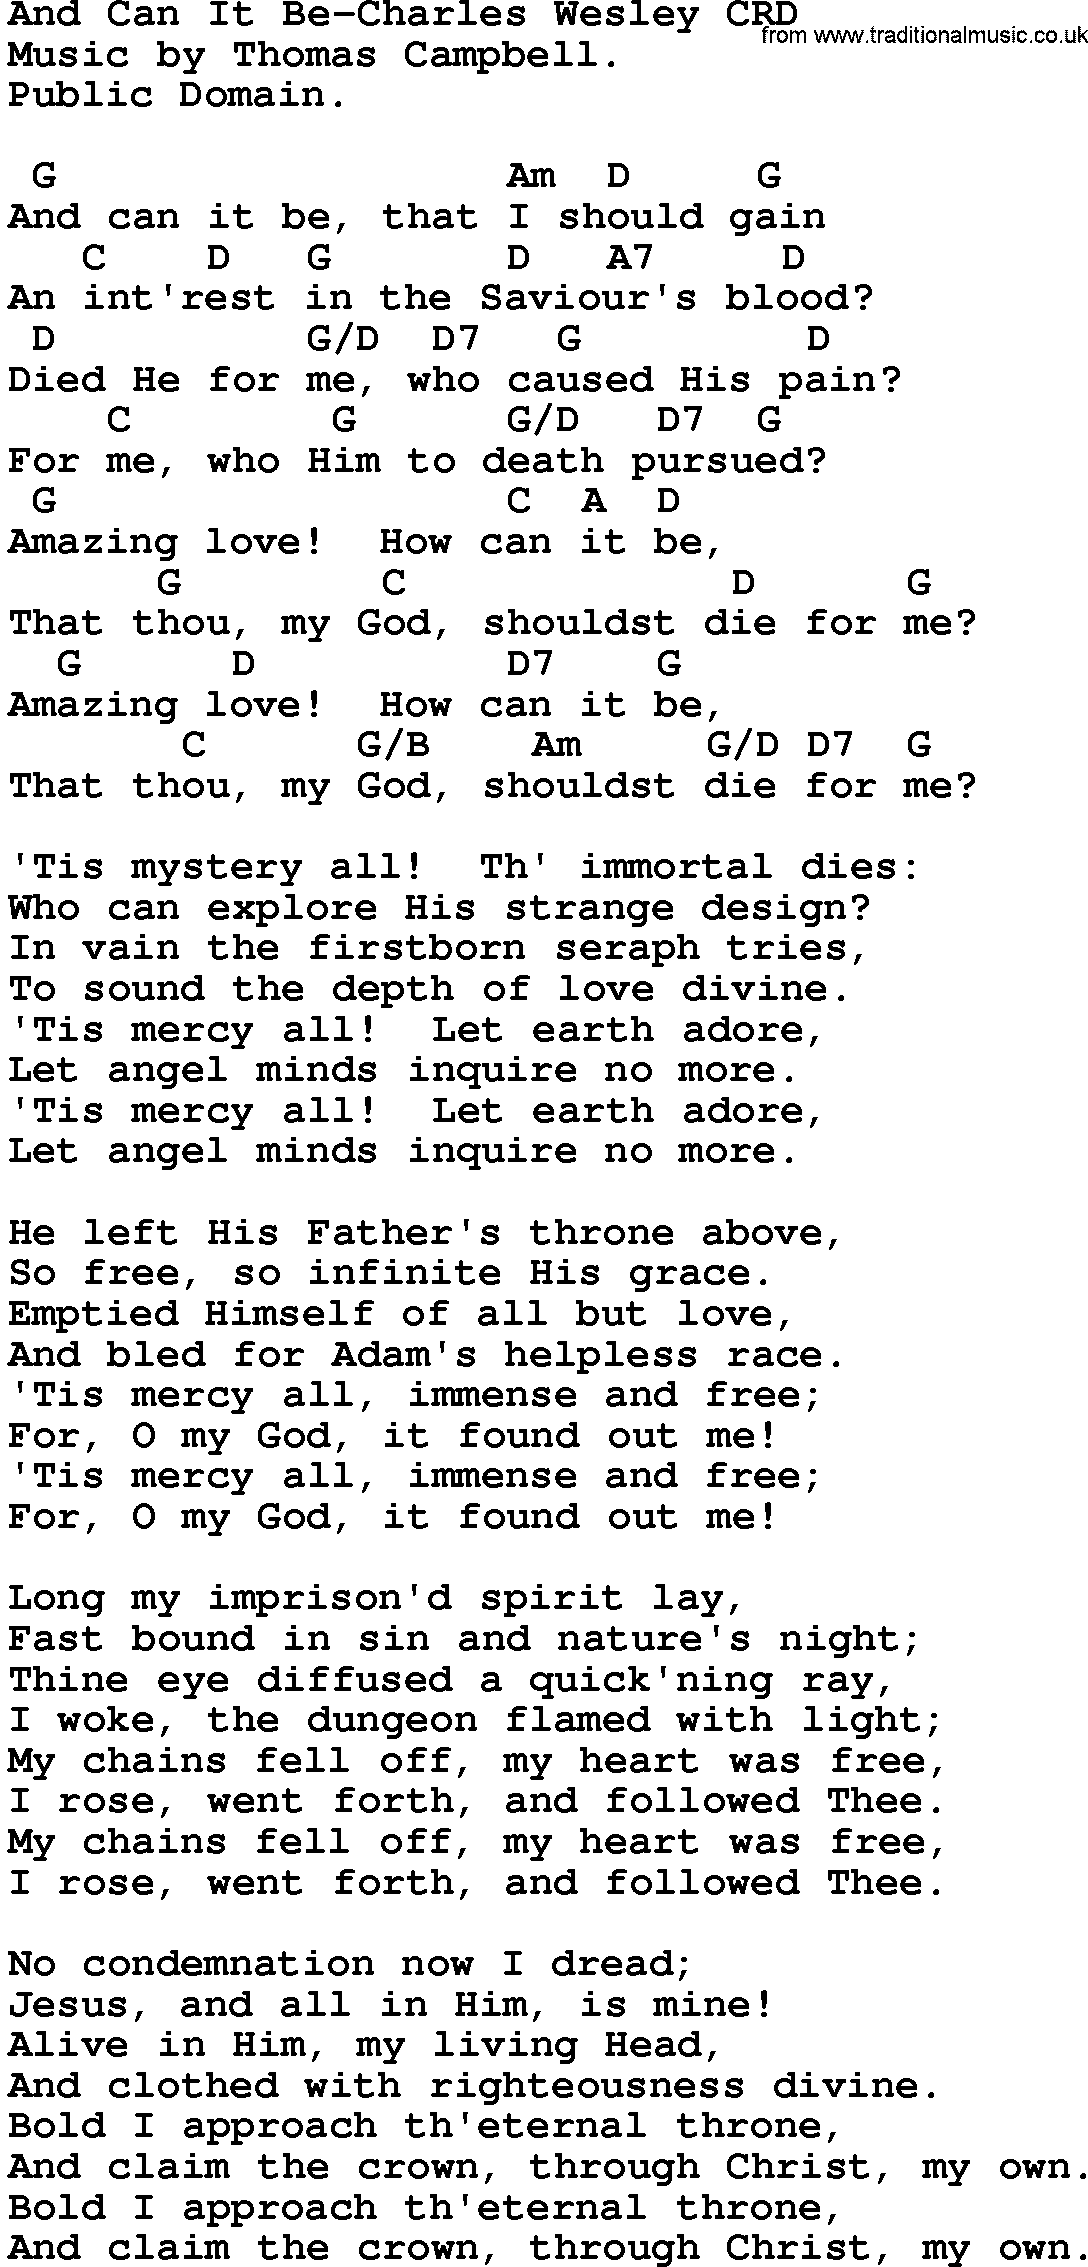 Gospel Song: And Can It Be-Charles Wesley, lyrics and chords.